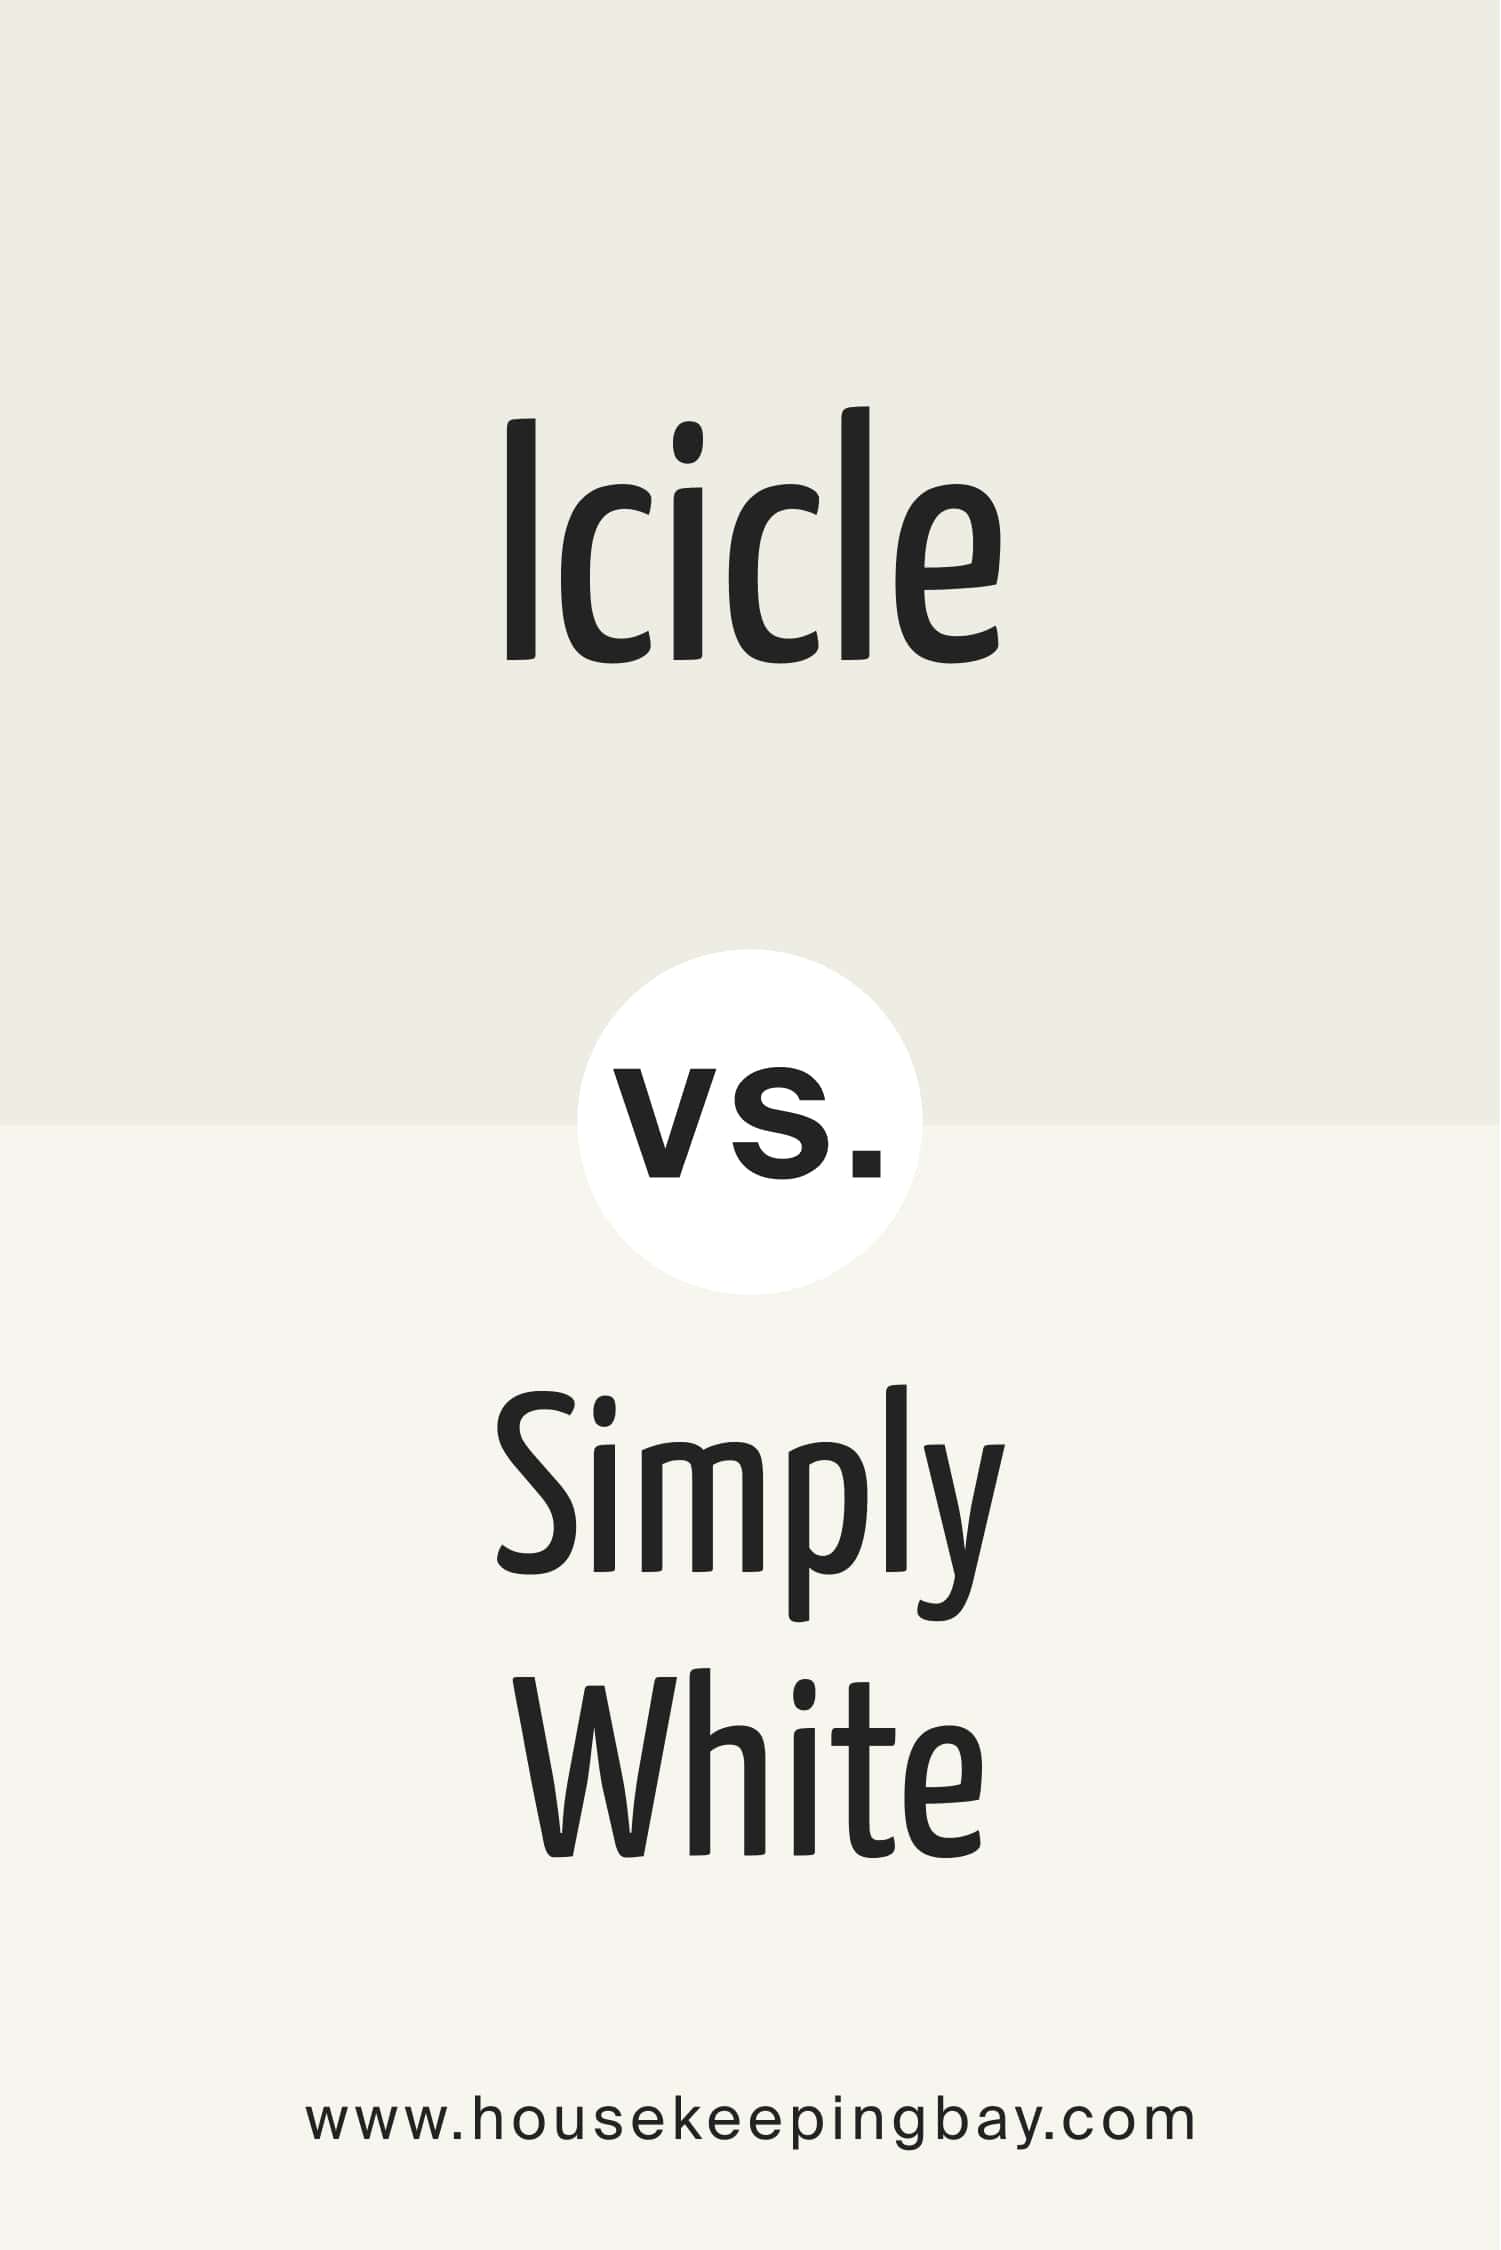 Icicle vs Simply White